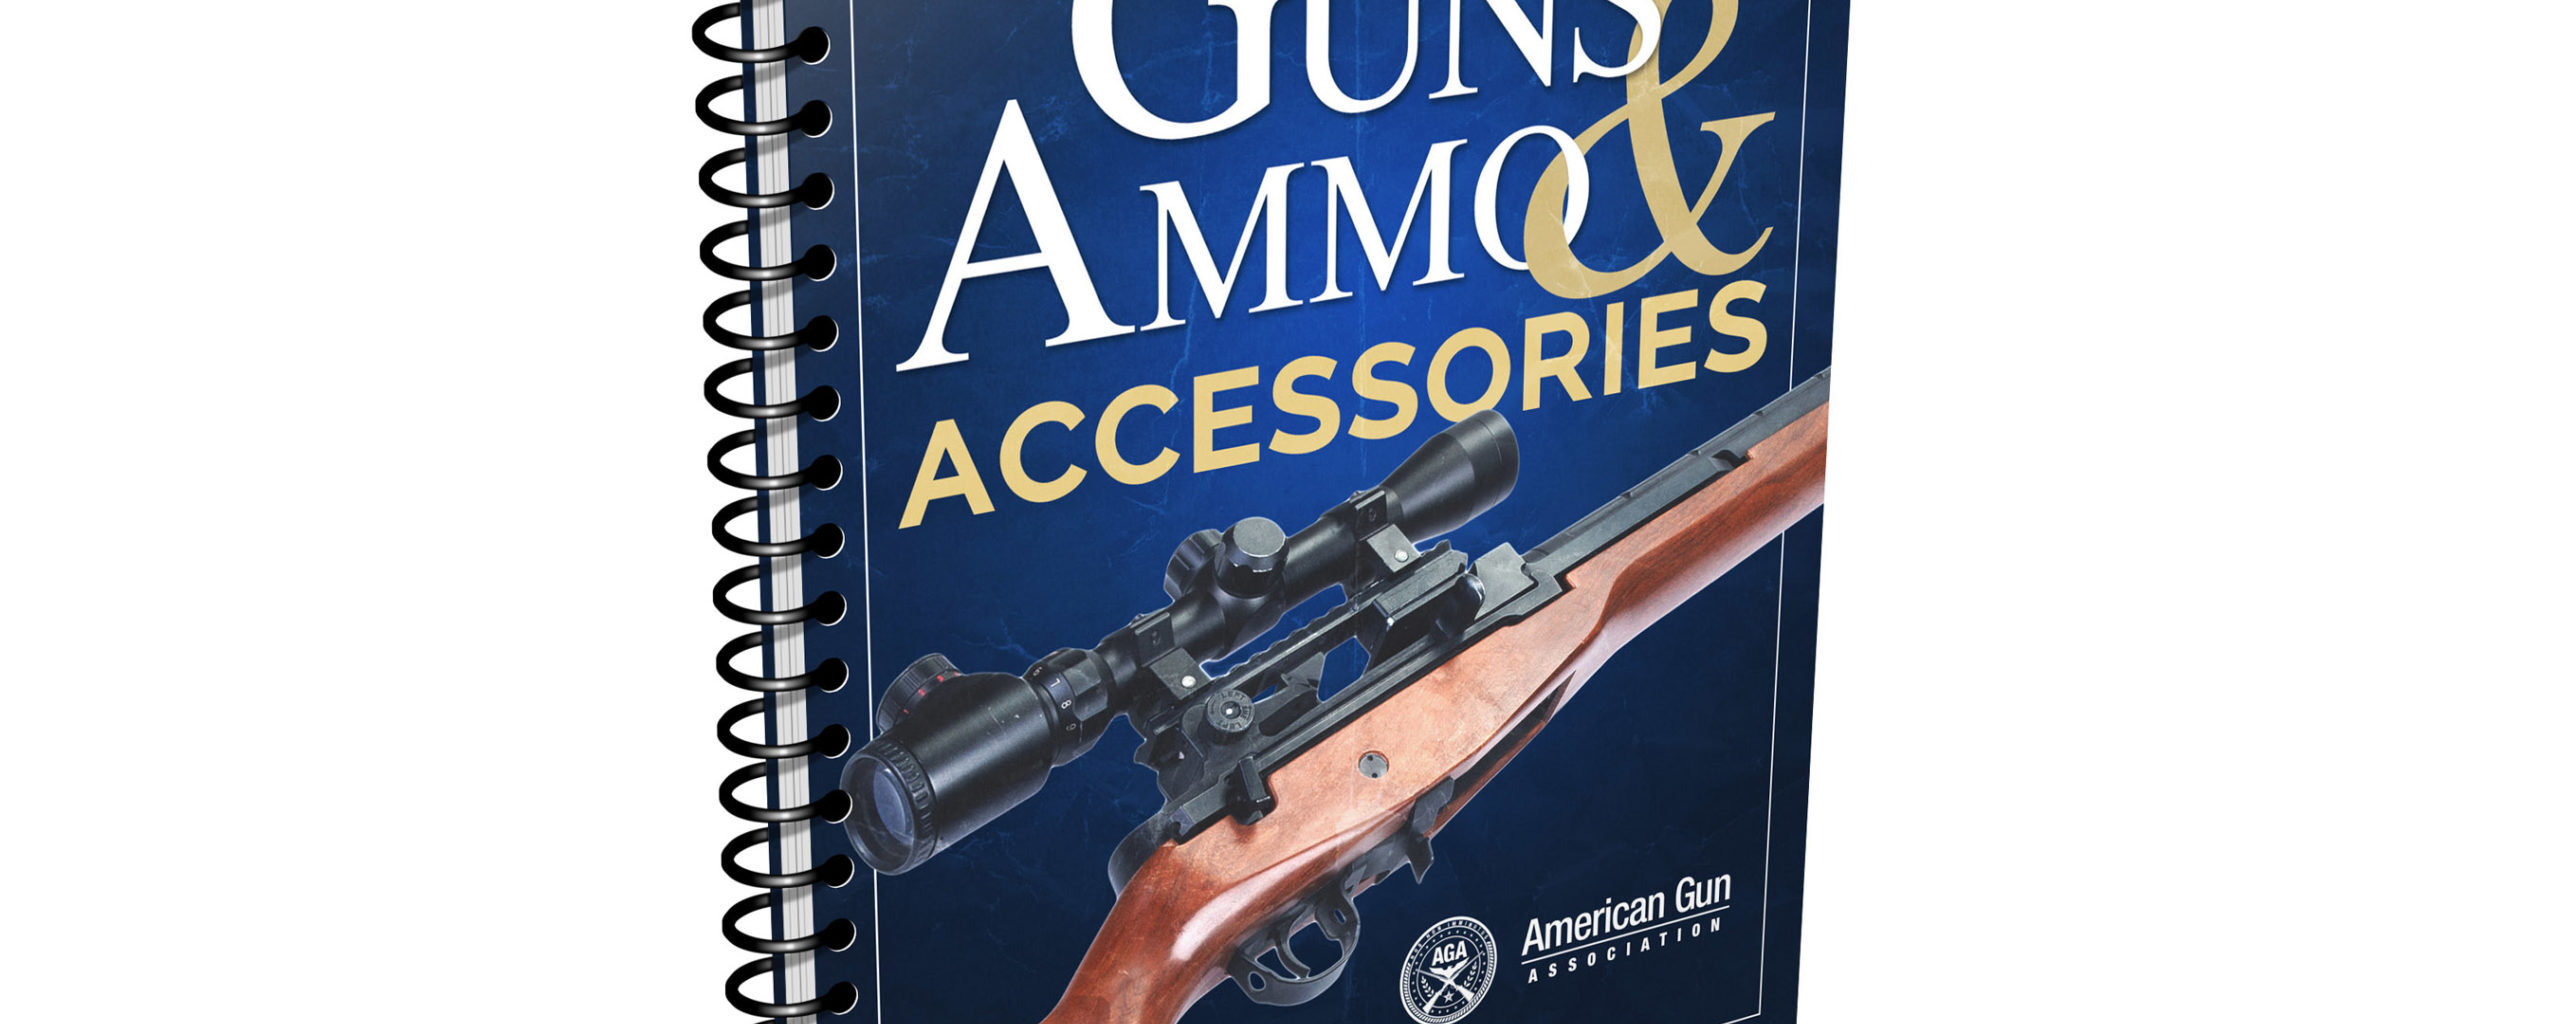 Guns, Ammo and Accessories